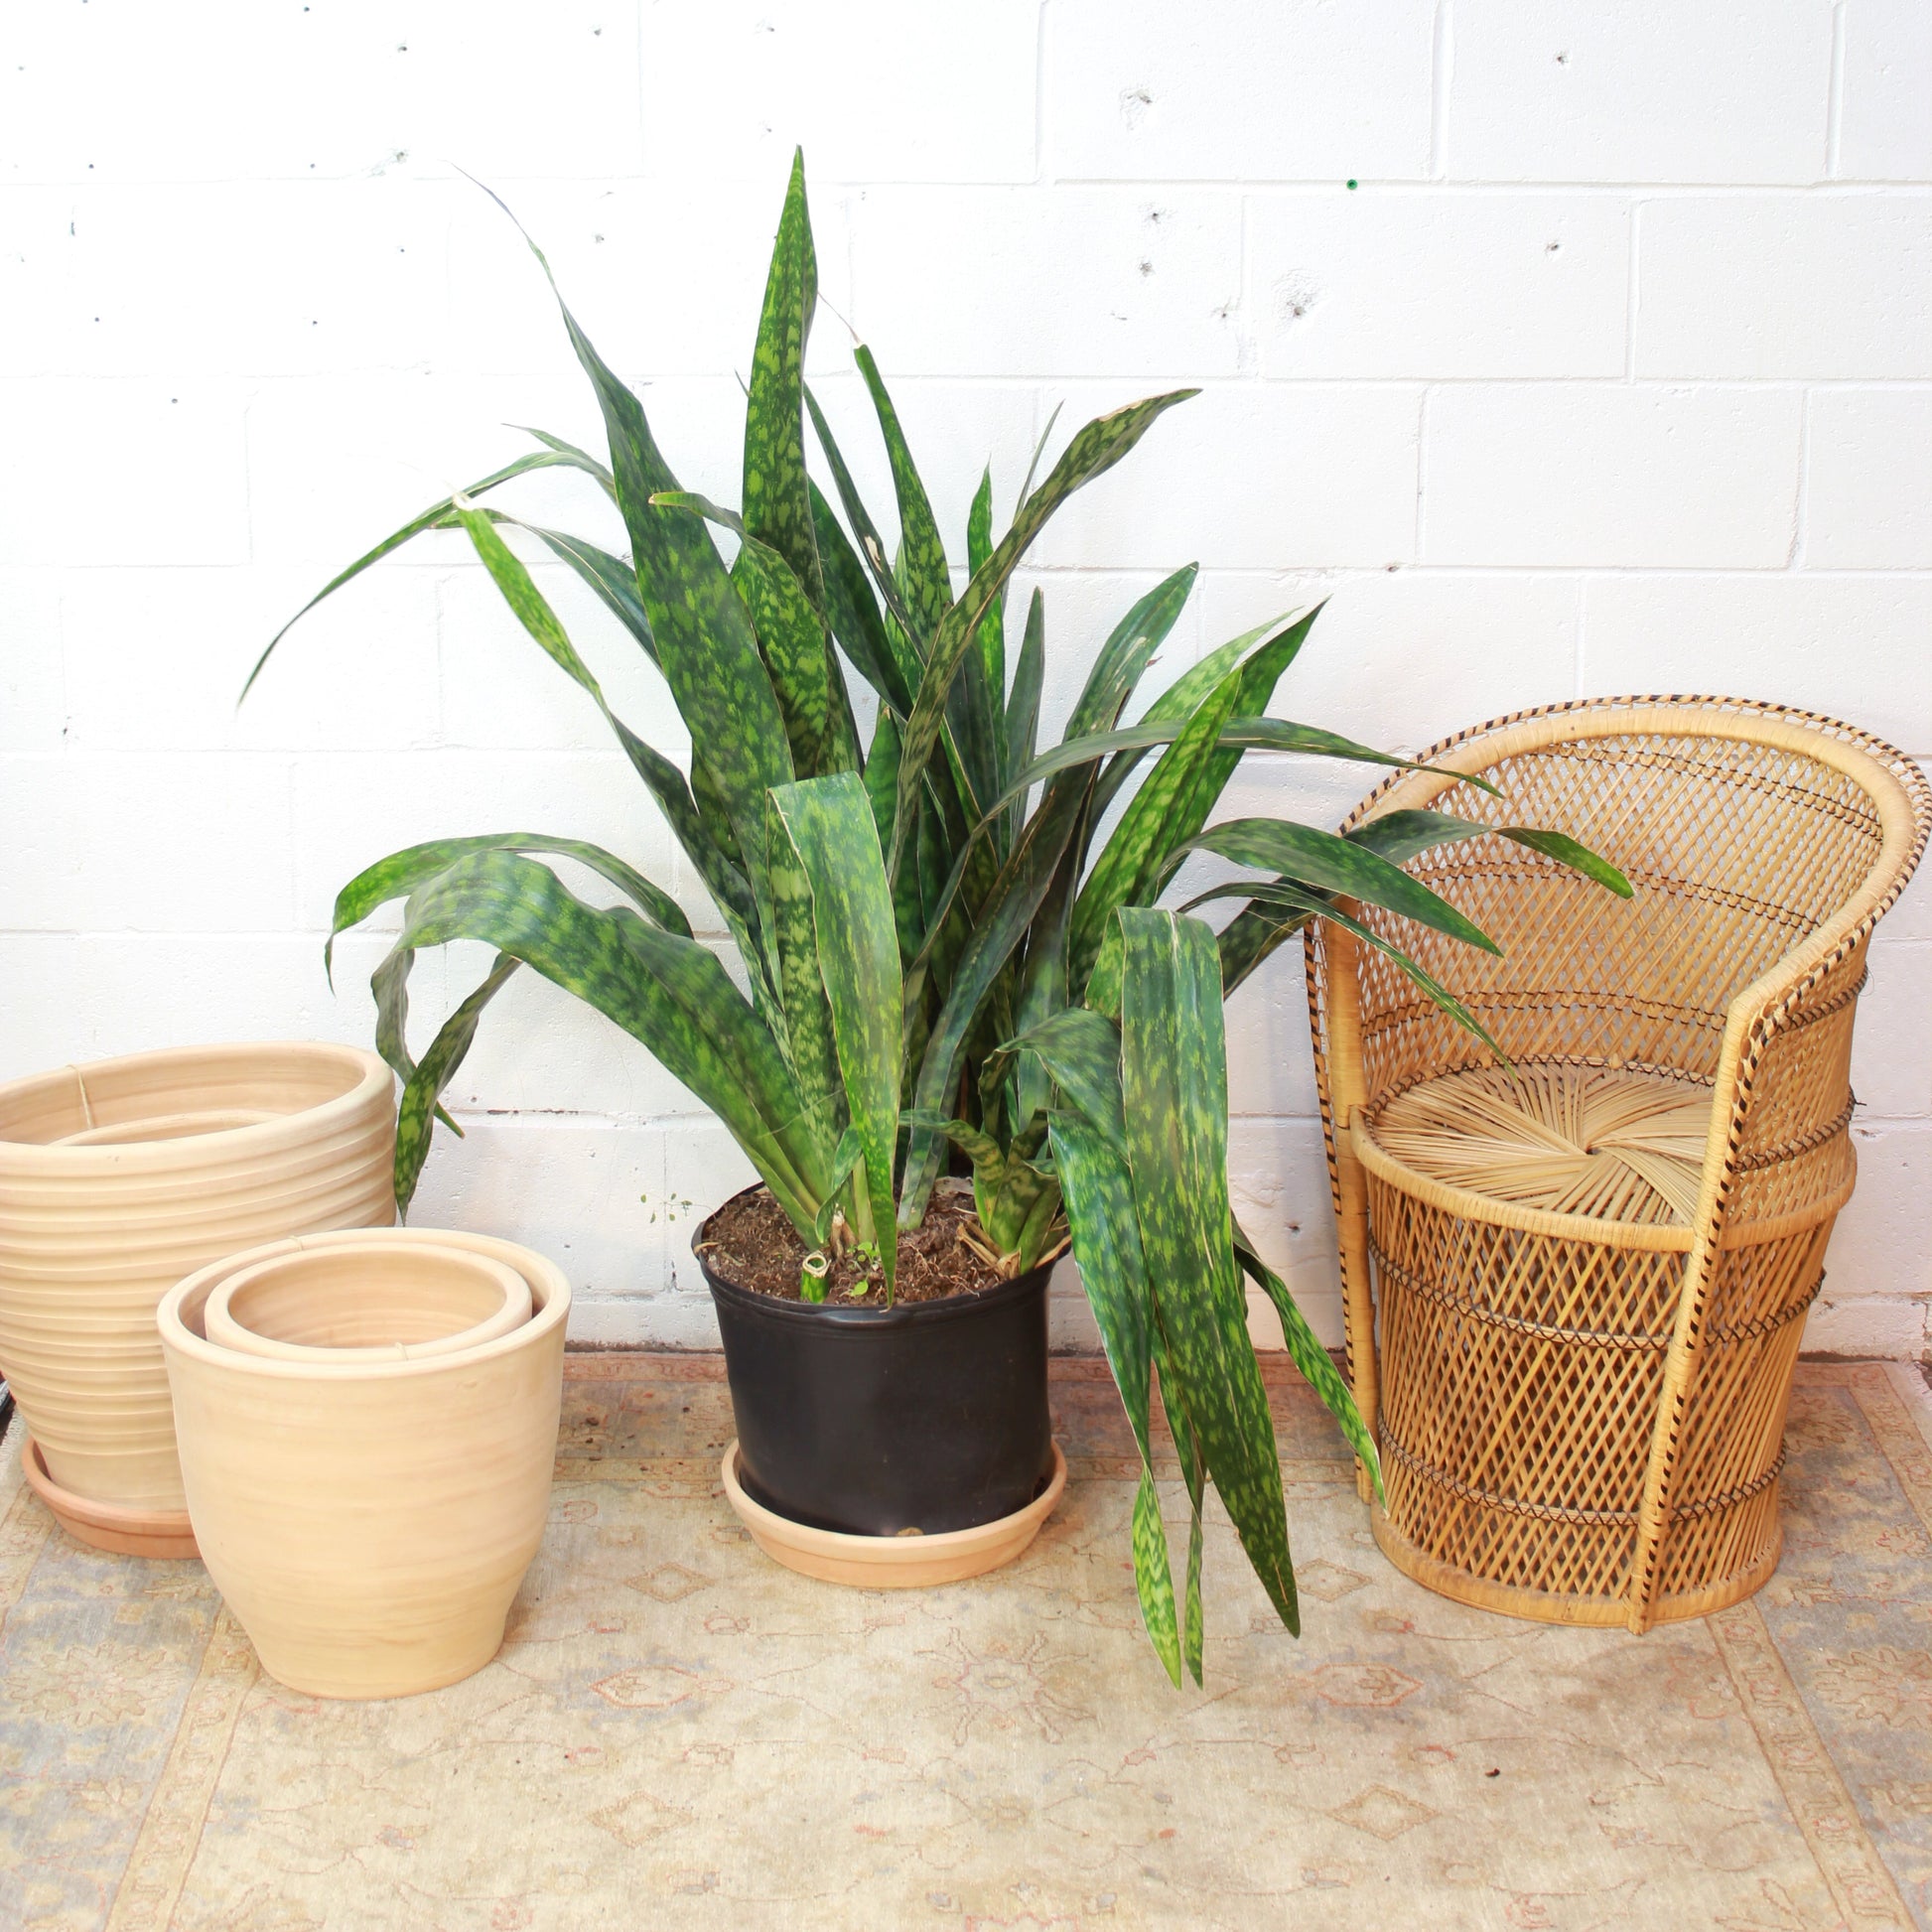 Snake Plant, Mother in Law's Tongue, Viper's Bowstring Hemp (Sansevieria trifasciata) in a 14 inch pot. Indoor plant for sale by Promise Supply for delivery and pickup in Toronto